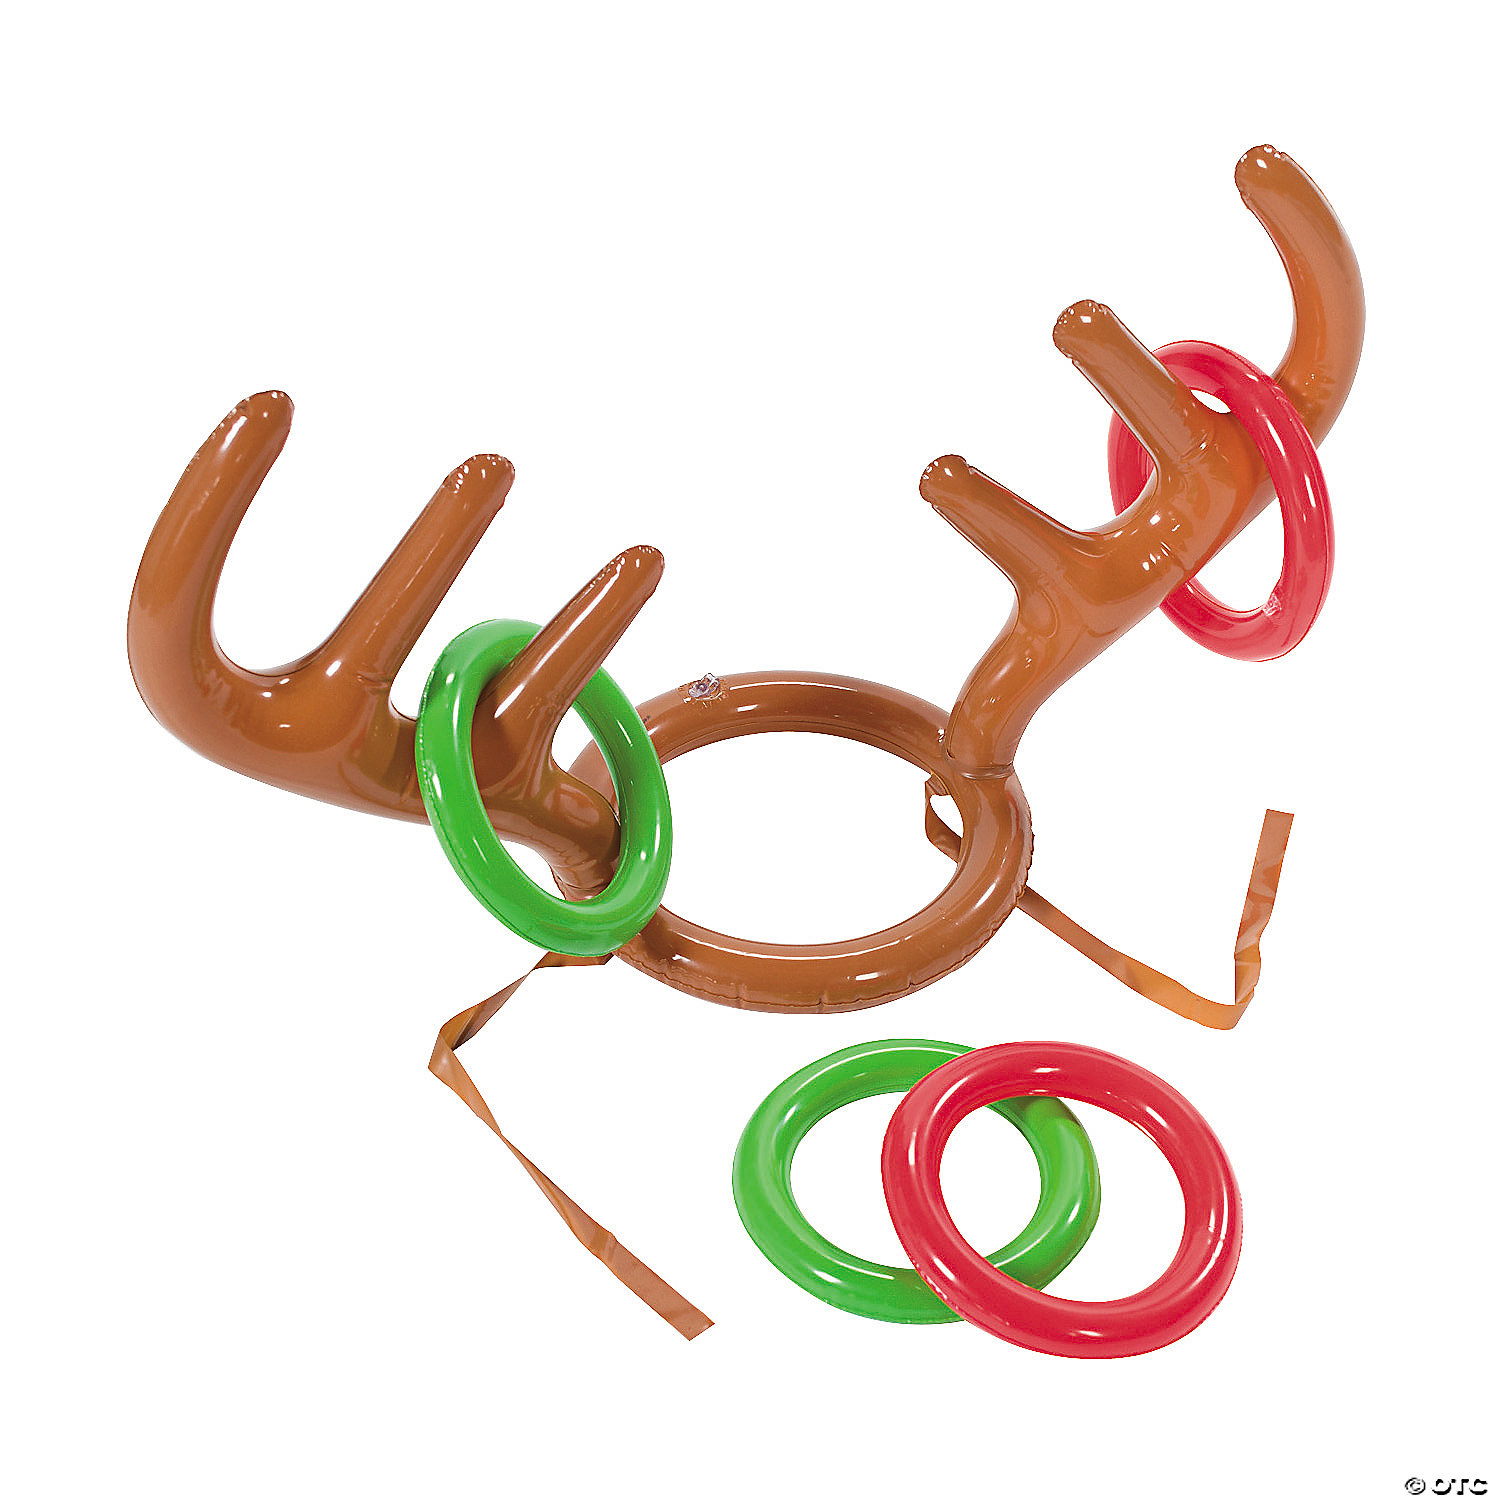 3 Packs Christmas Party Game Inflatable Reindeer Antler Ring Toss Game for Holiday Party Xmas Party 